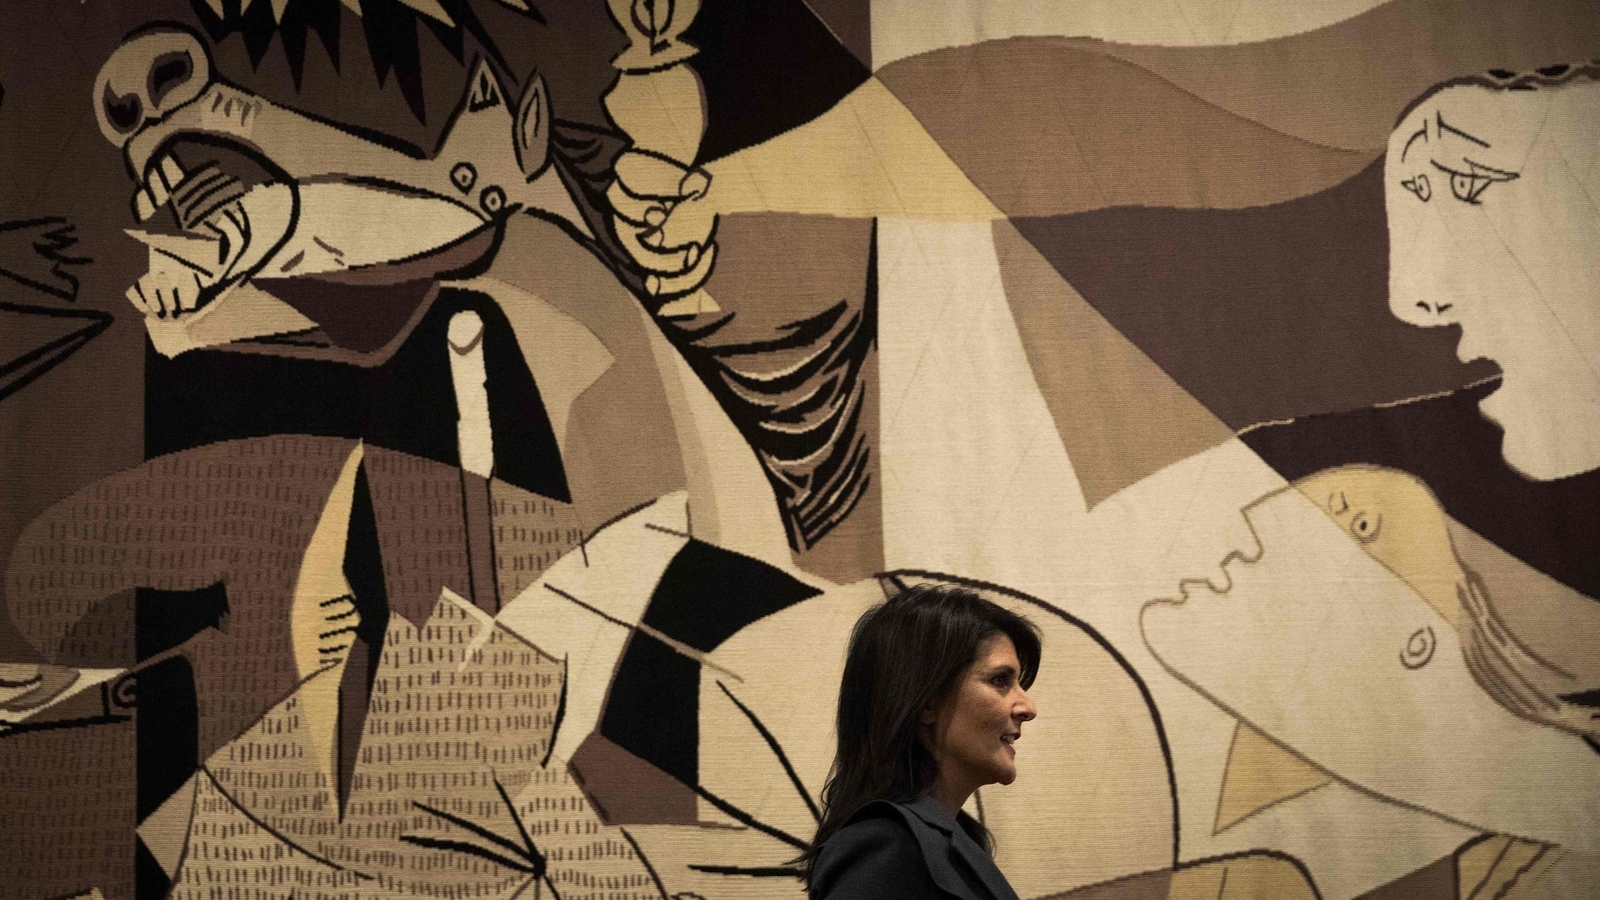 Picasso’s Iconic ‘Guernica’ Tapestry Returns to the UN | world news ...